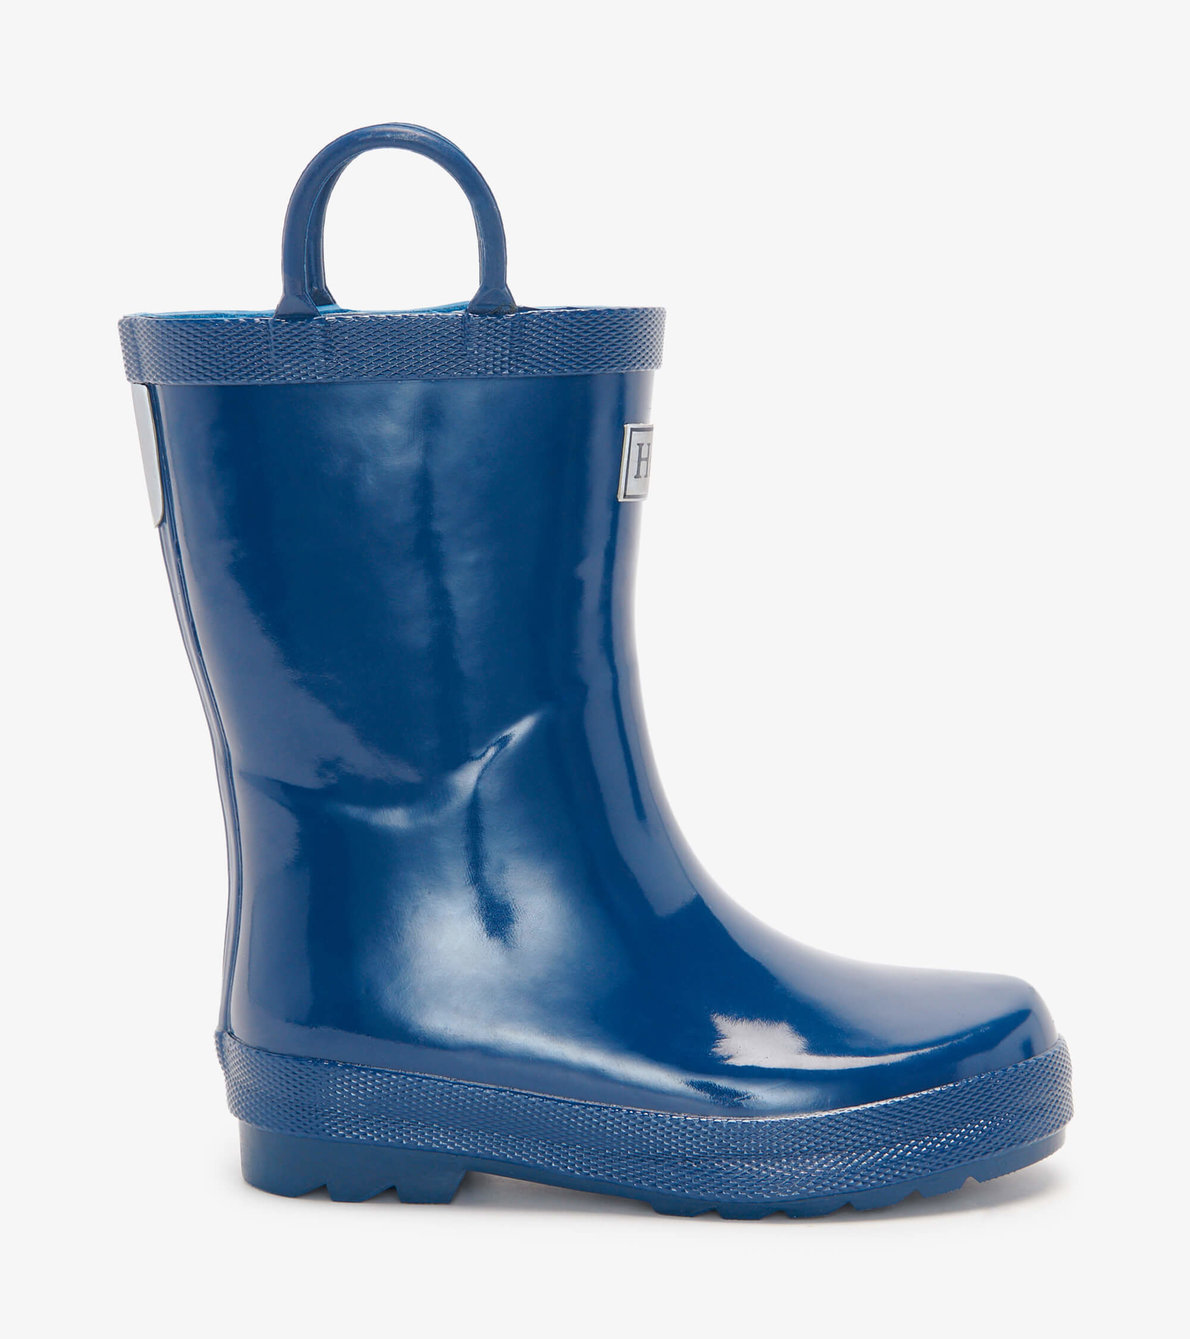 View larger image of Navy Shiny Wellies